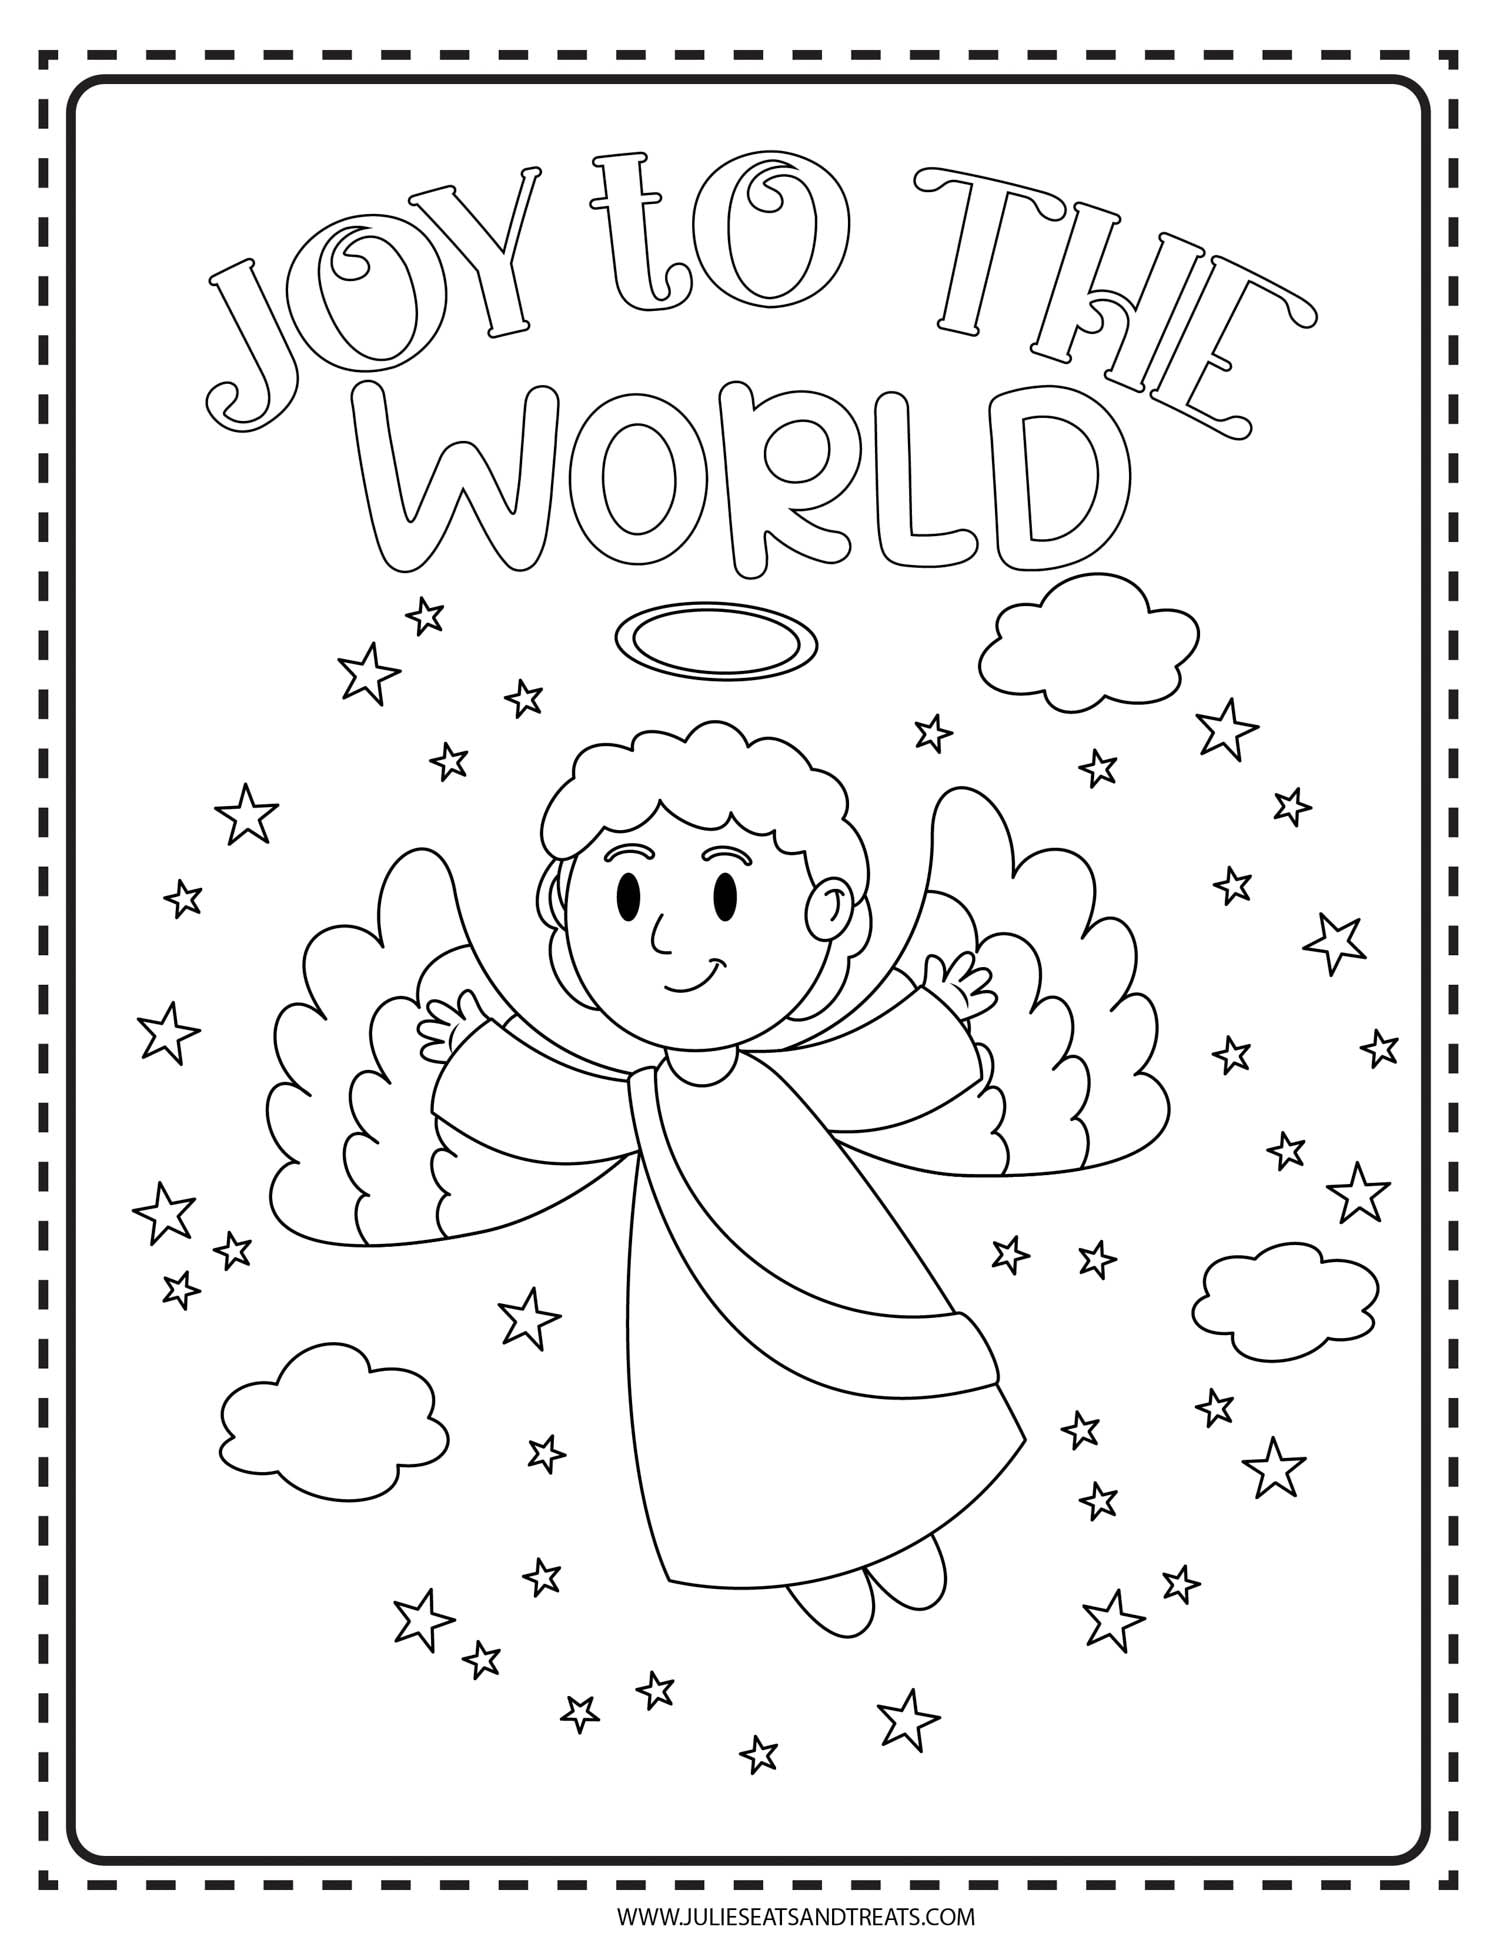 Joy to the World Angel on coloring sheet